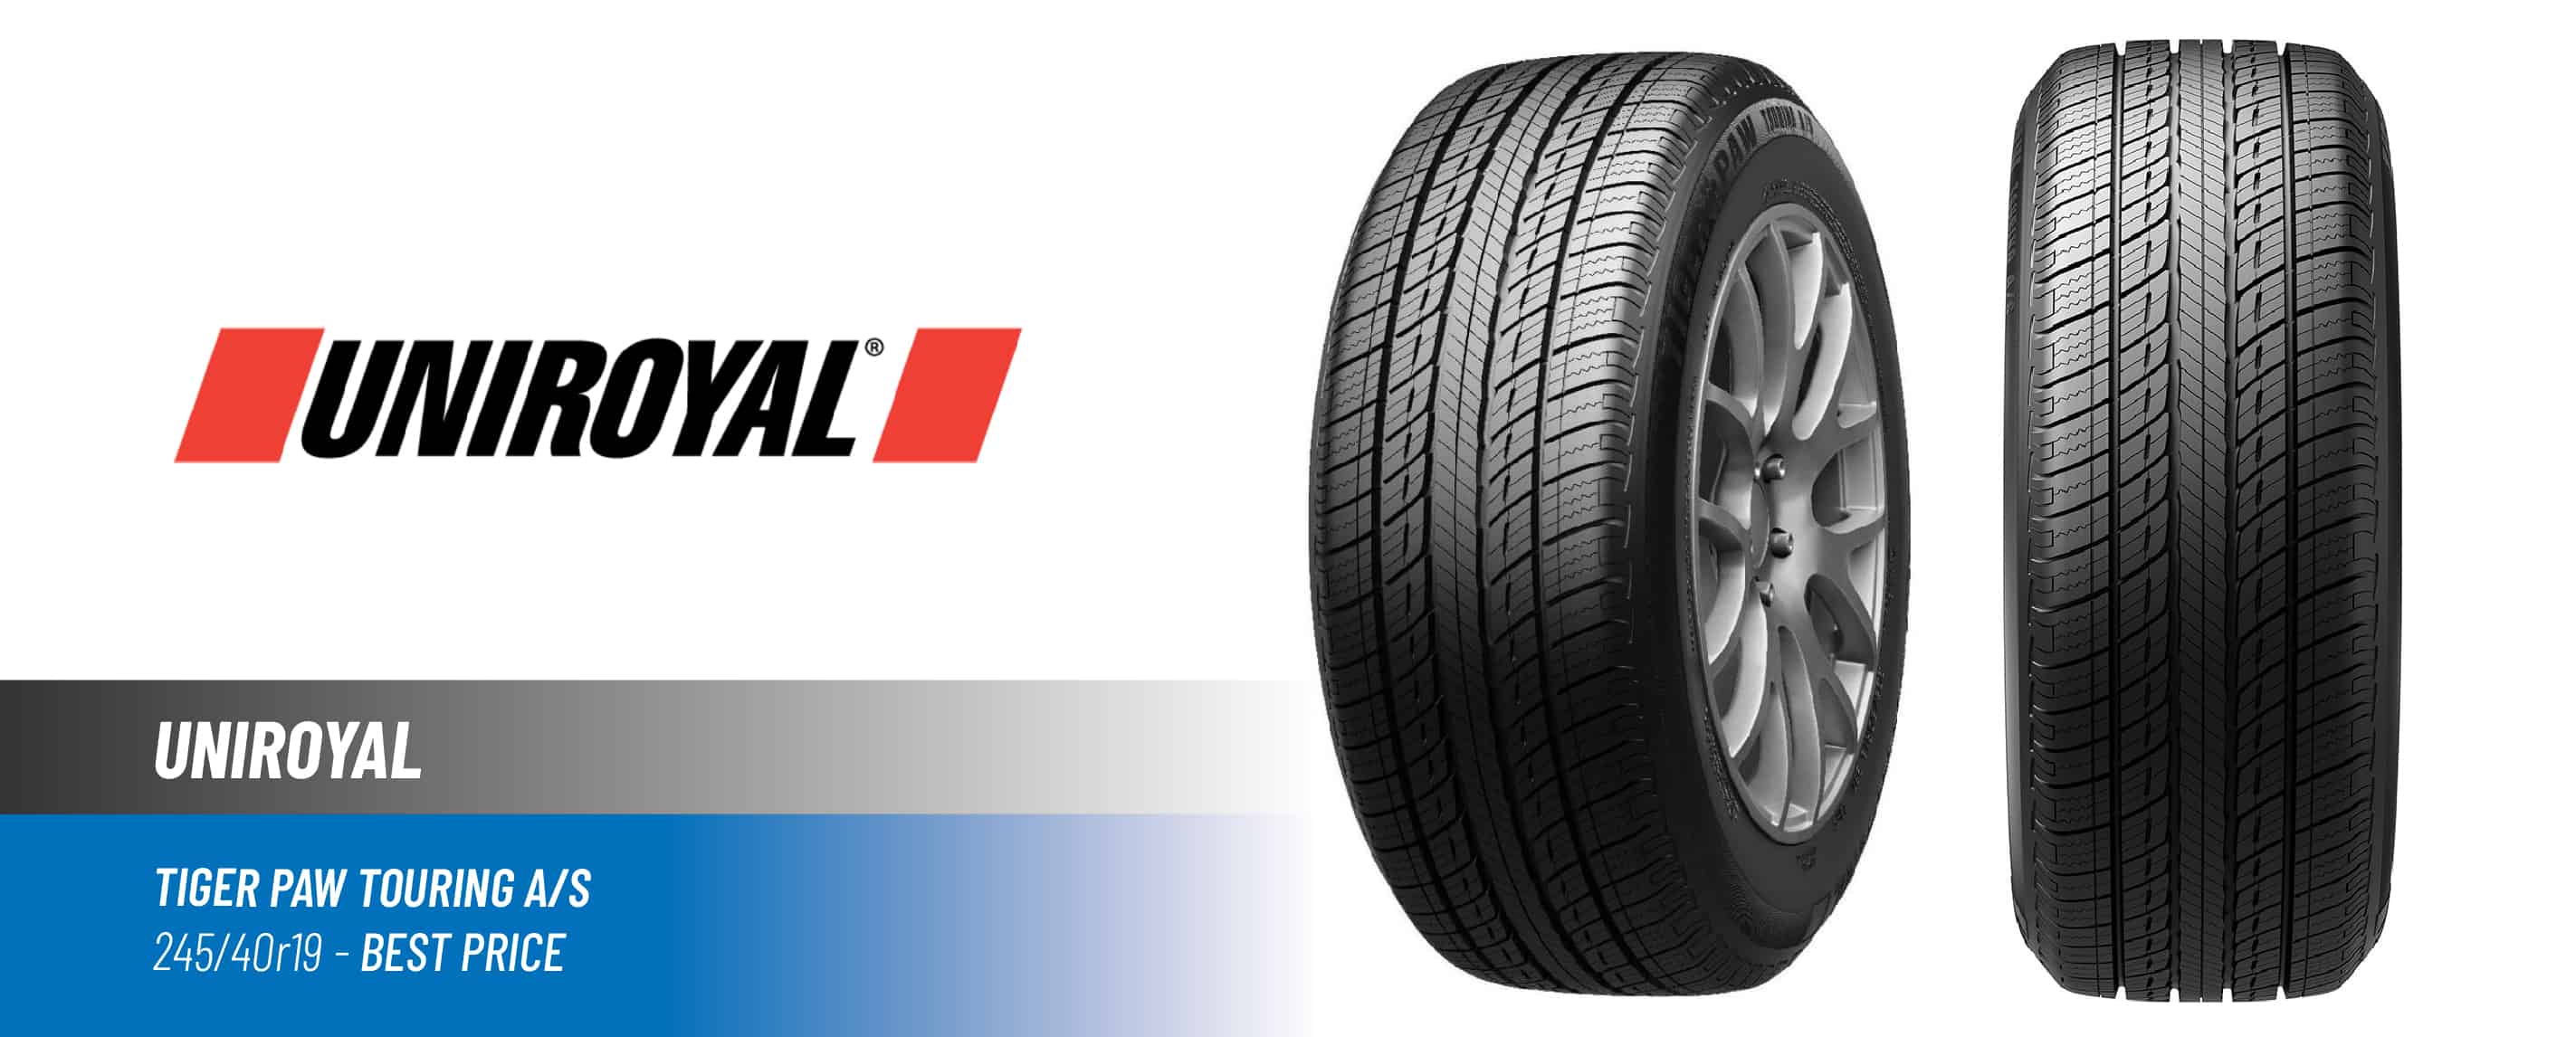 Top#4 Best Price: Uniroyal Tiger Paw Touring A/S – 245/40 R19